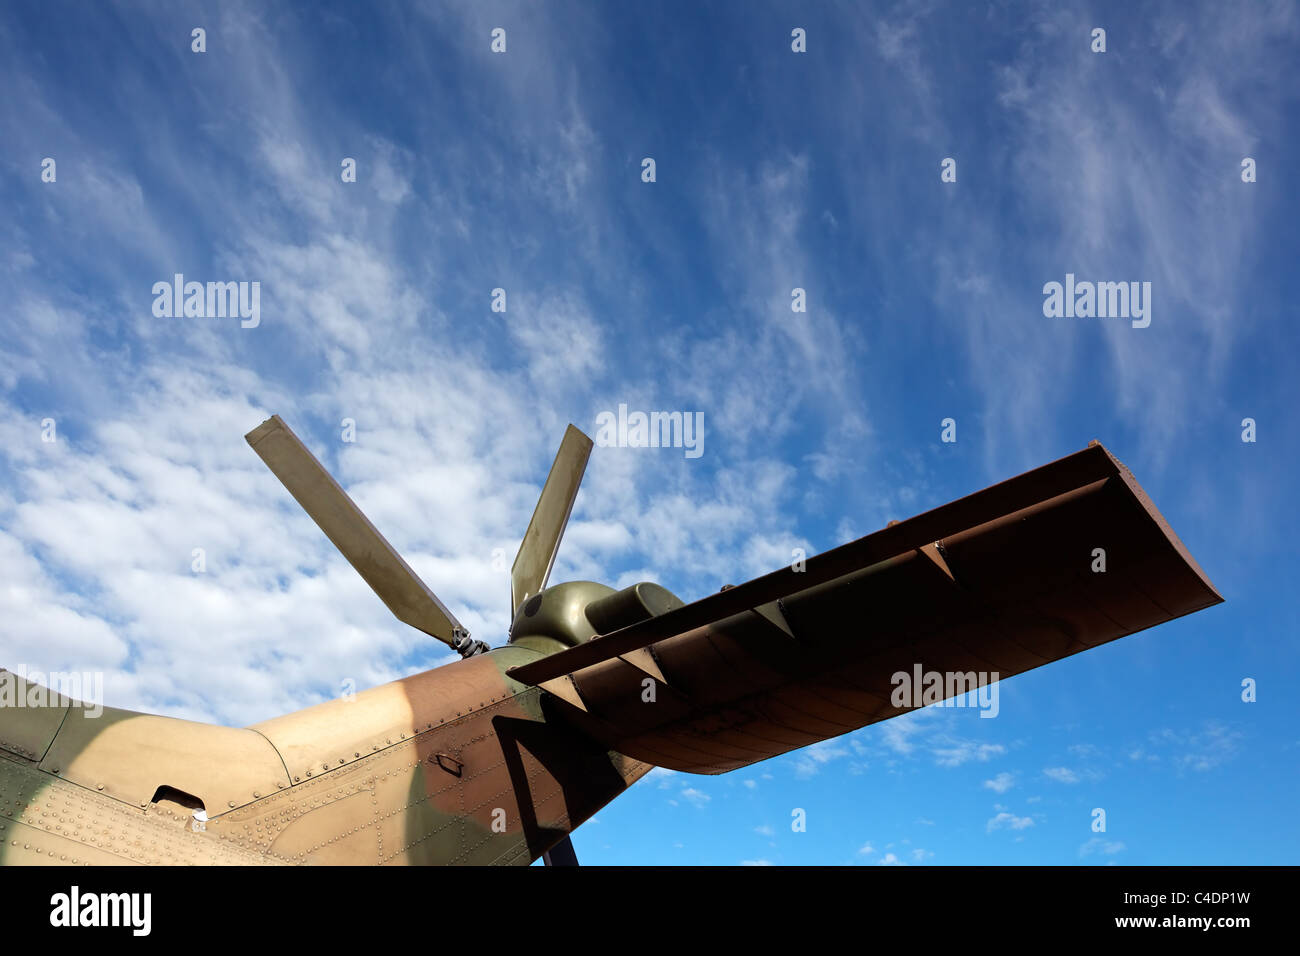 Tail rotor and tail wing of a military helicopter against a blue sky with clouds Stock Photo